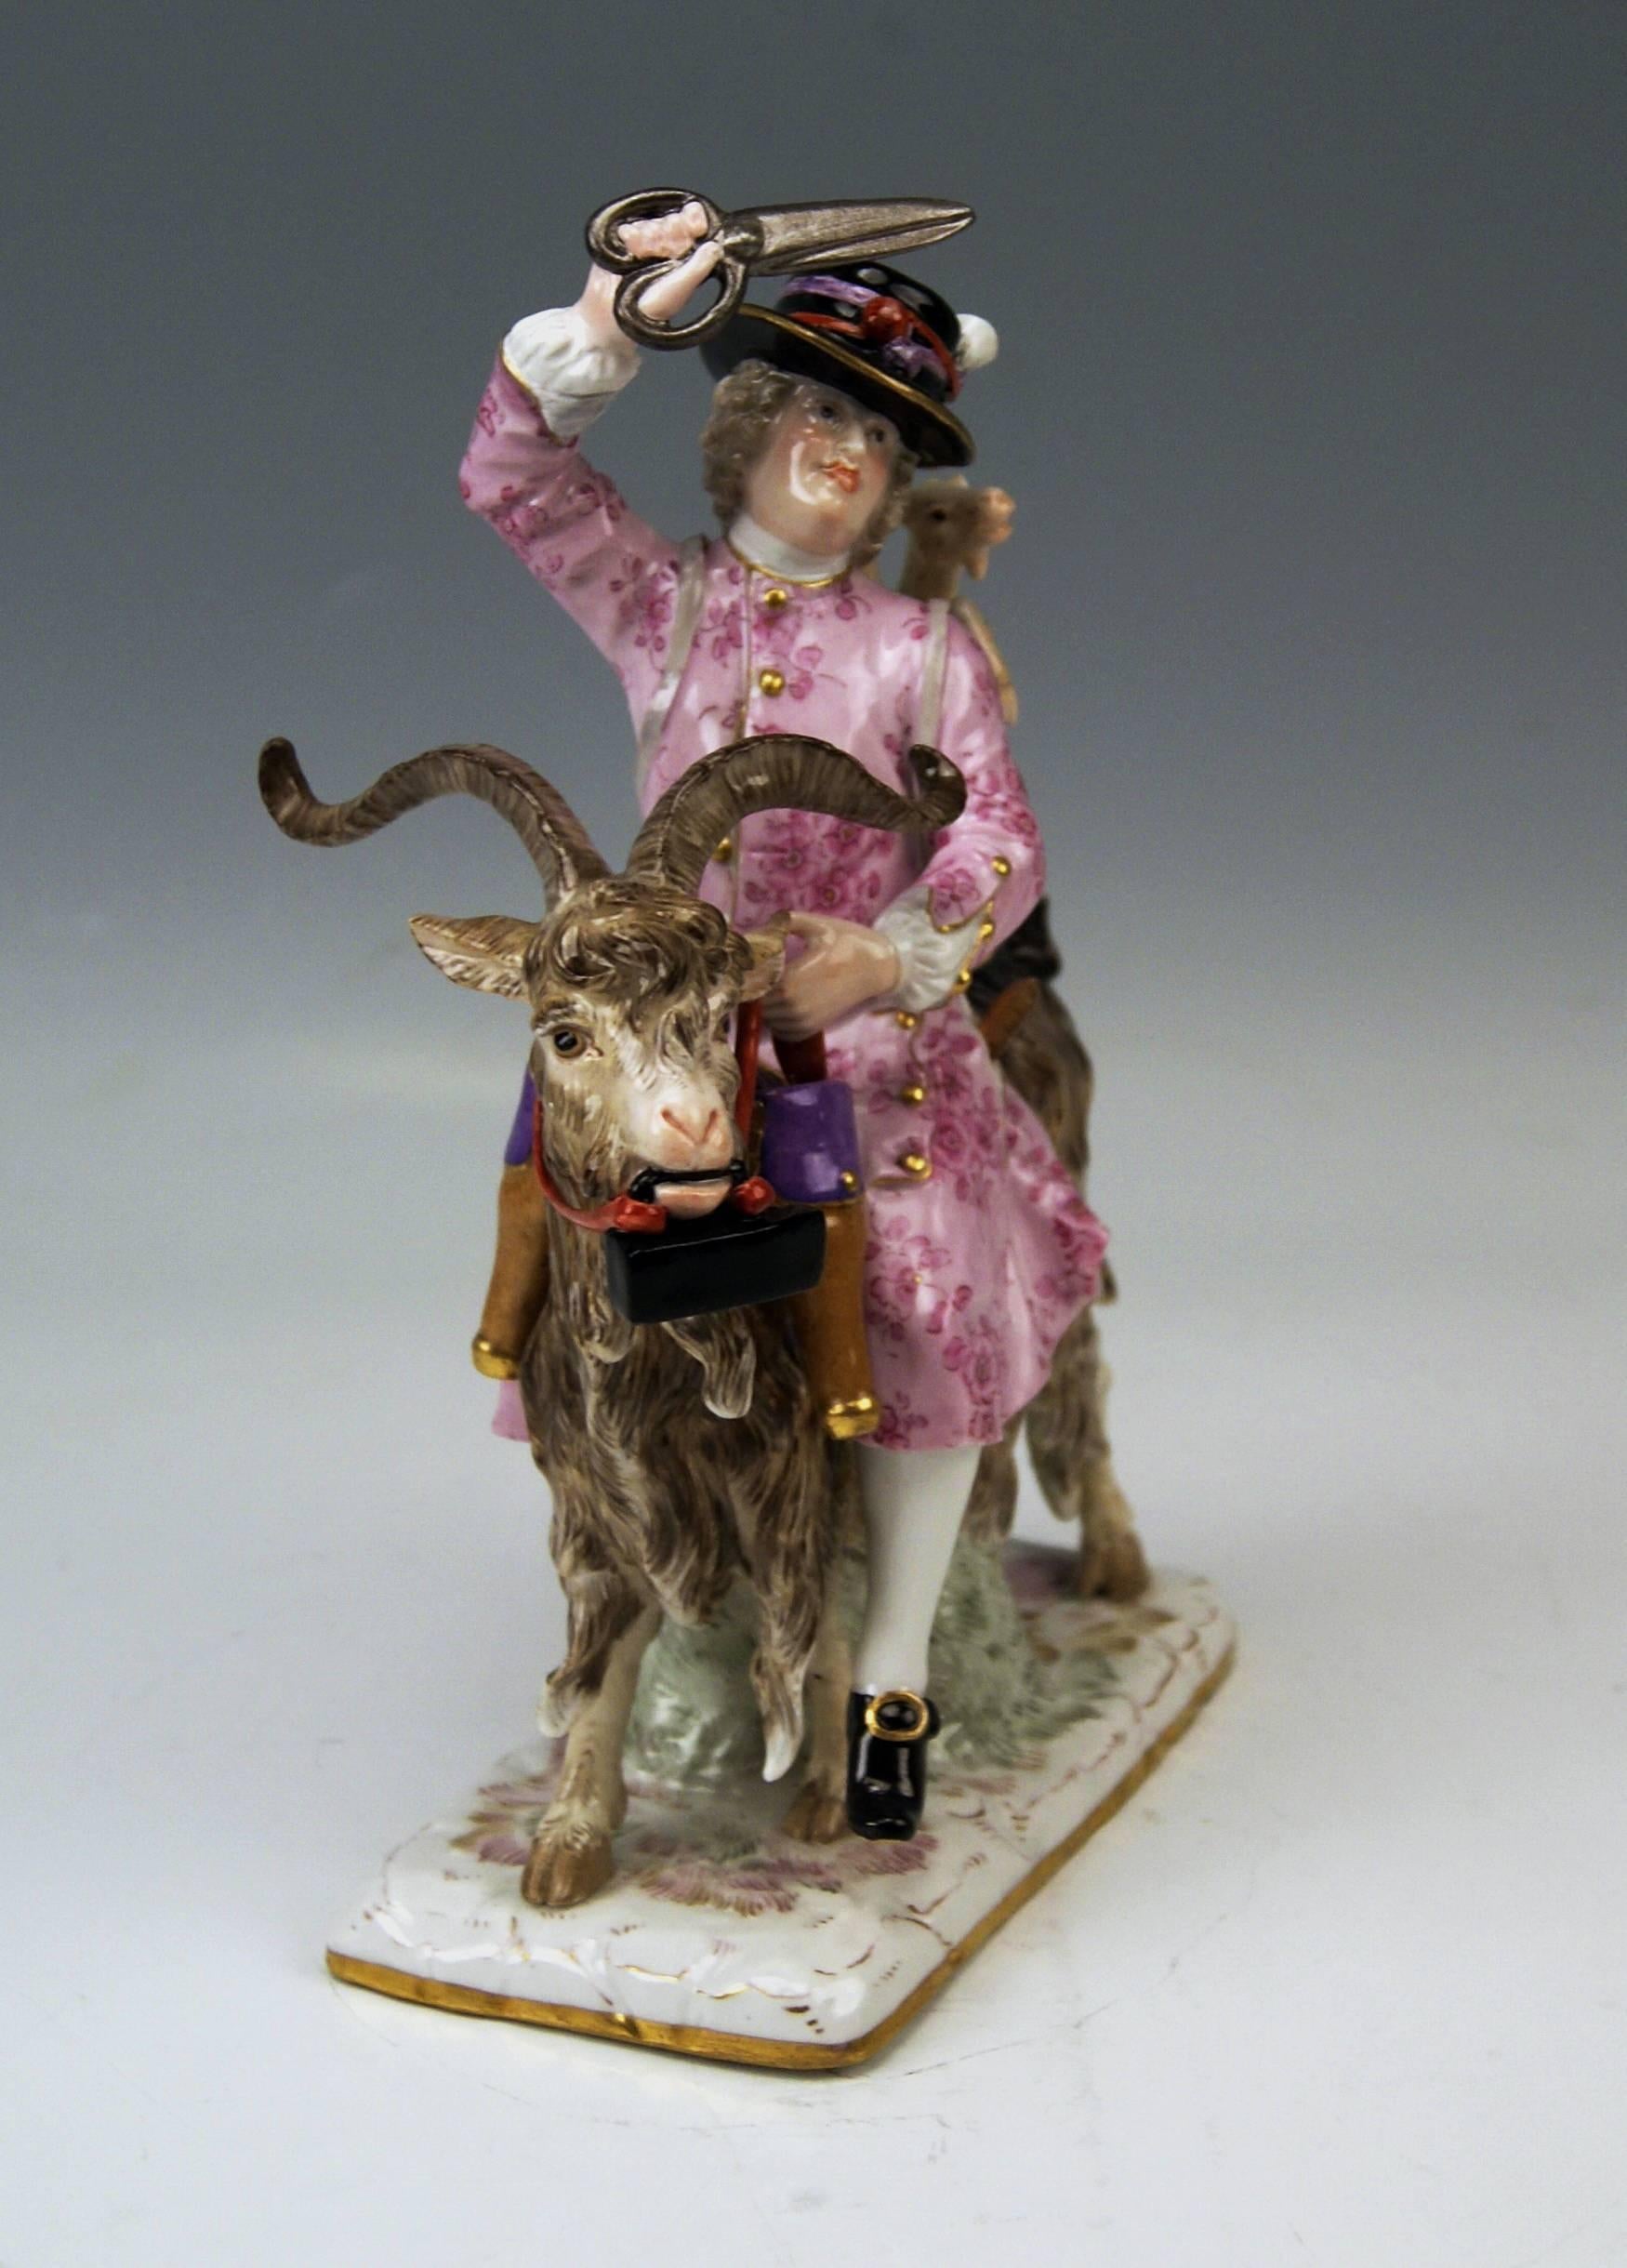 Meissen Gorgeous figurine called 'Tailor Of Count Bruehl Riding On Goat.'

Measures / dimensions:
Height: 22.5 cm (8.85 inches ). 
measures of base: 14.5 x 7.5 cm (5.70 x 2.95 inches).

Manufactory: Meissen.
Hallmarked: Blue Meissen Sword